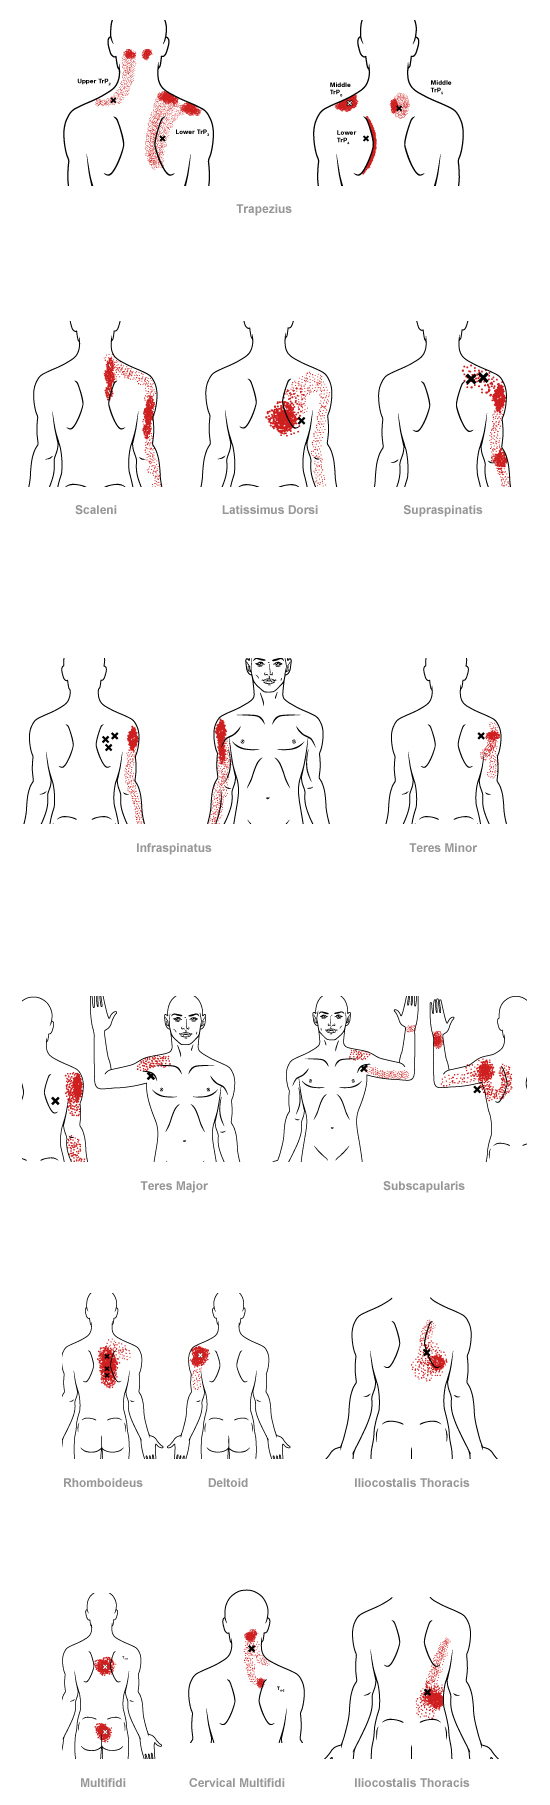 trigger point referral pain pattern for the mid back